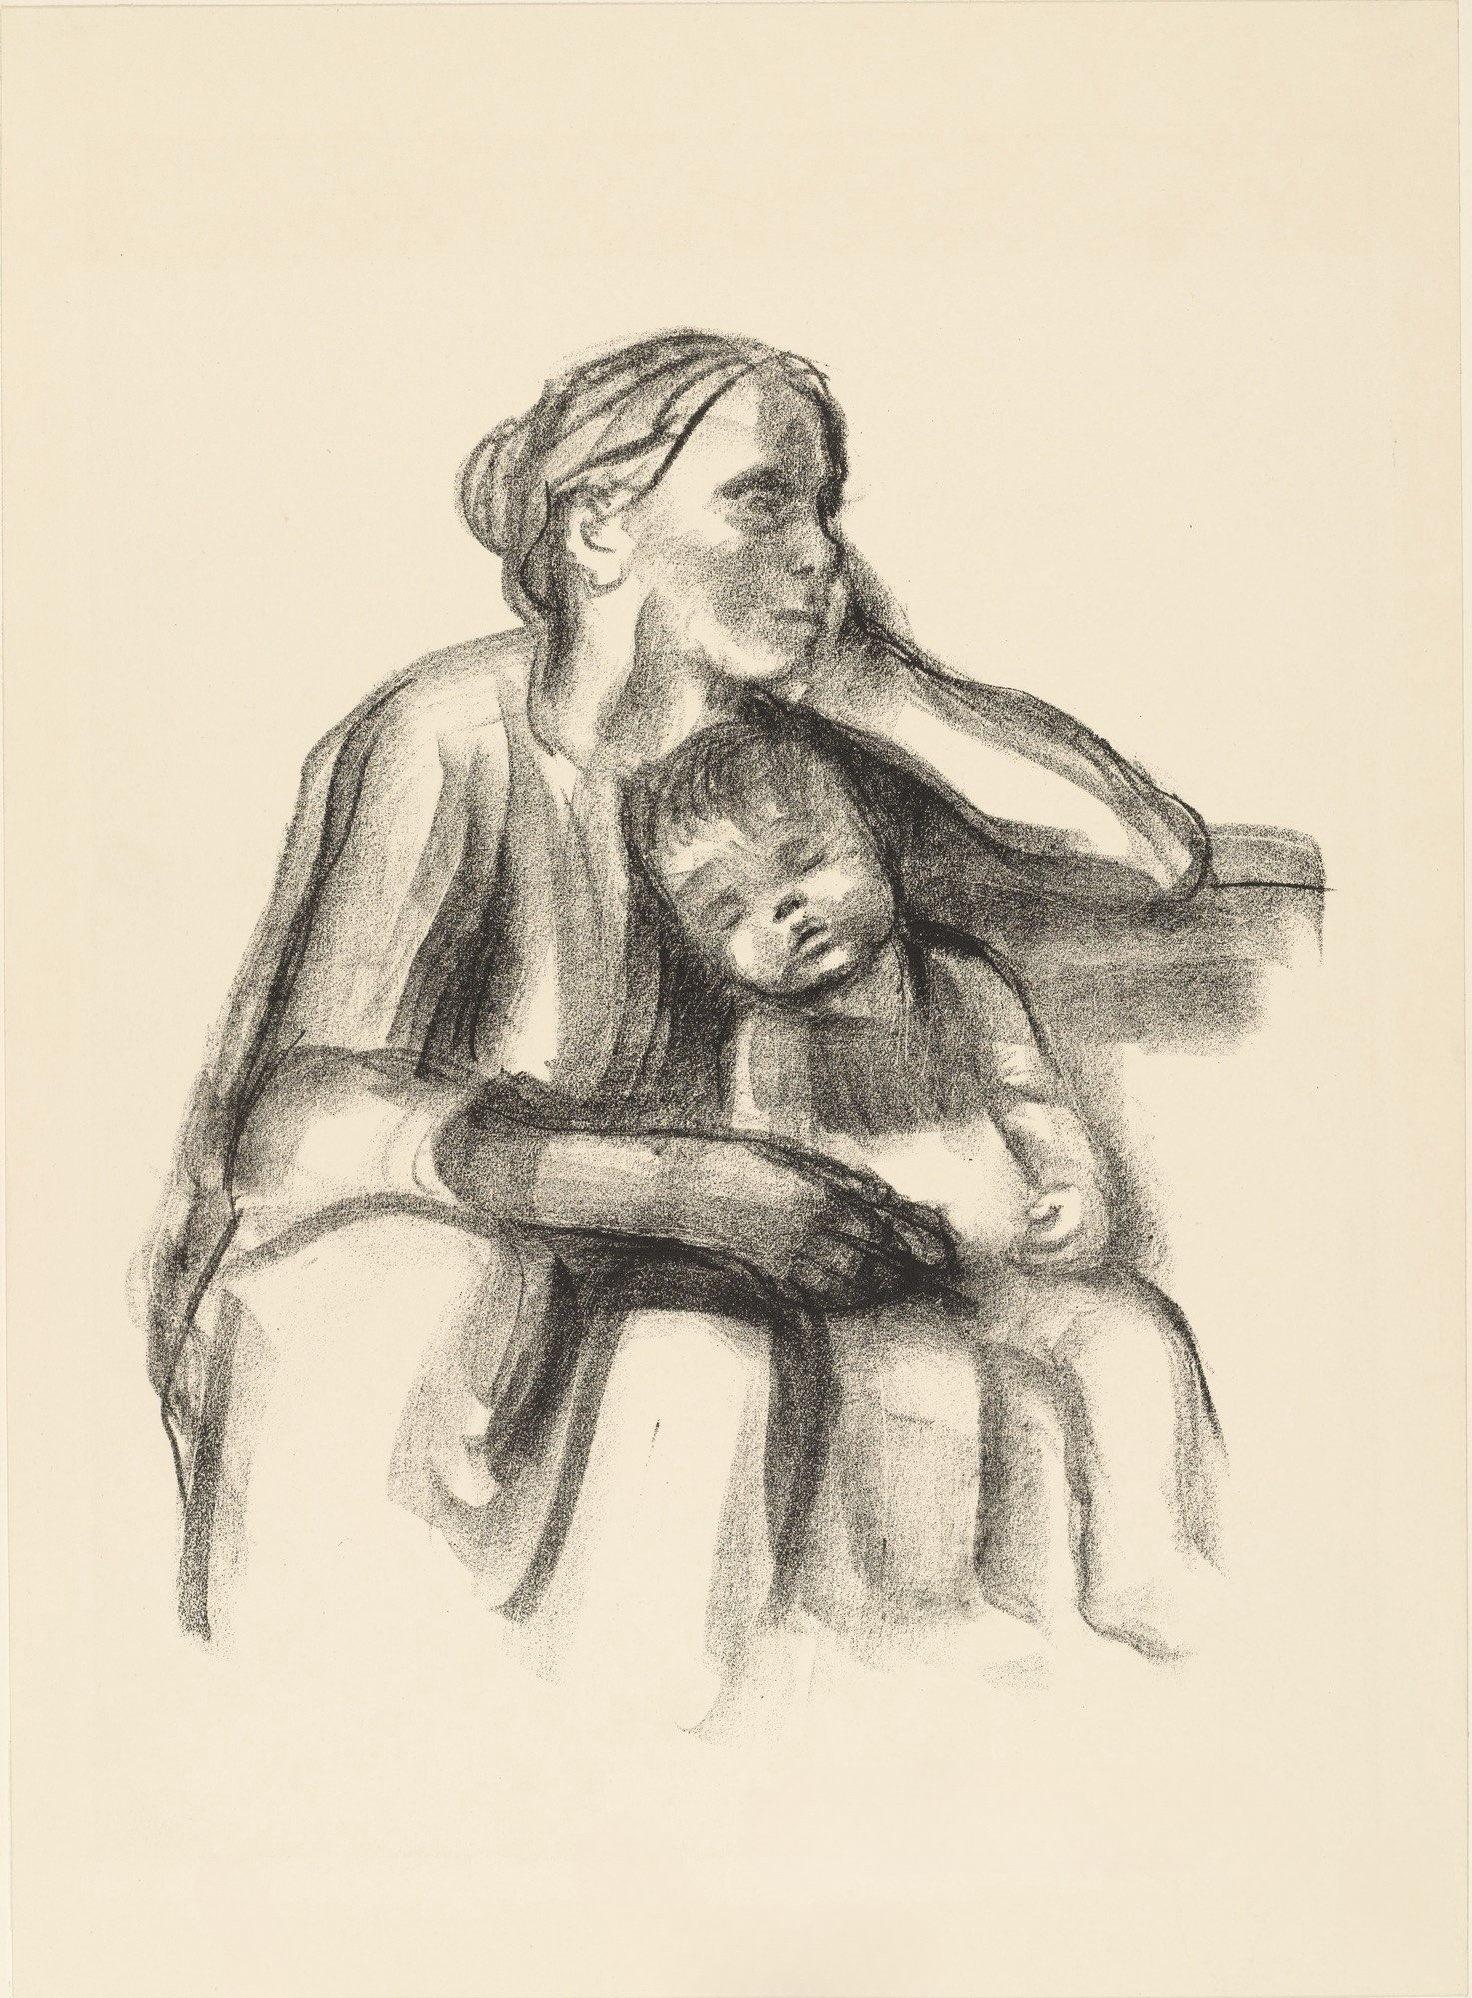 Lithograph on vélin paper. Inscription: Unsigned and unnumbered, as issued. Good condition. Notes: From the folio, Kathe Kollwitz, Ten Lithographs. Published by Henry C. Kleemann and Curt Valentin, New York, 1941.

KATHE KOLLWITZ (1867-1945) was a